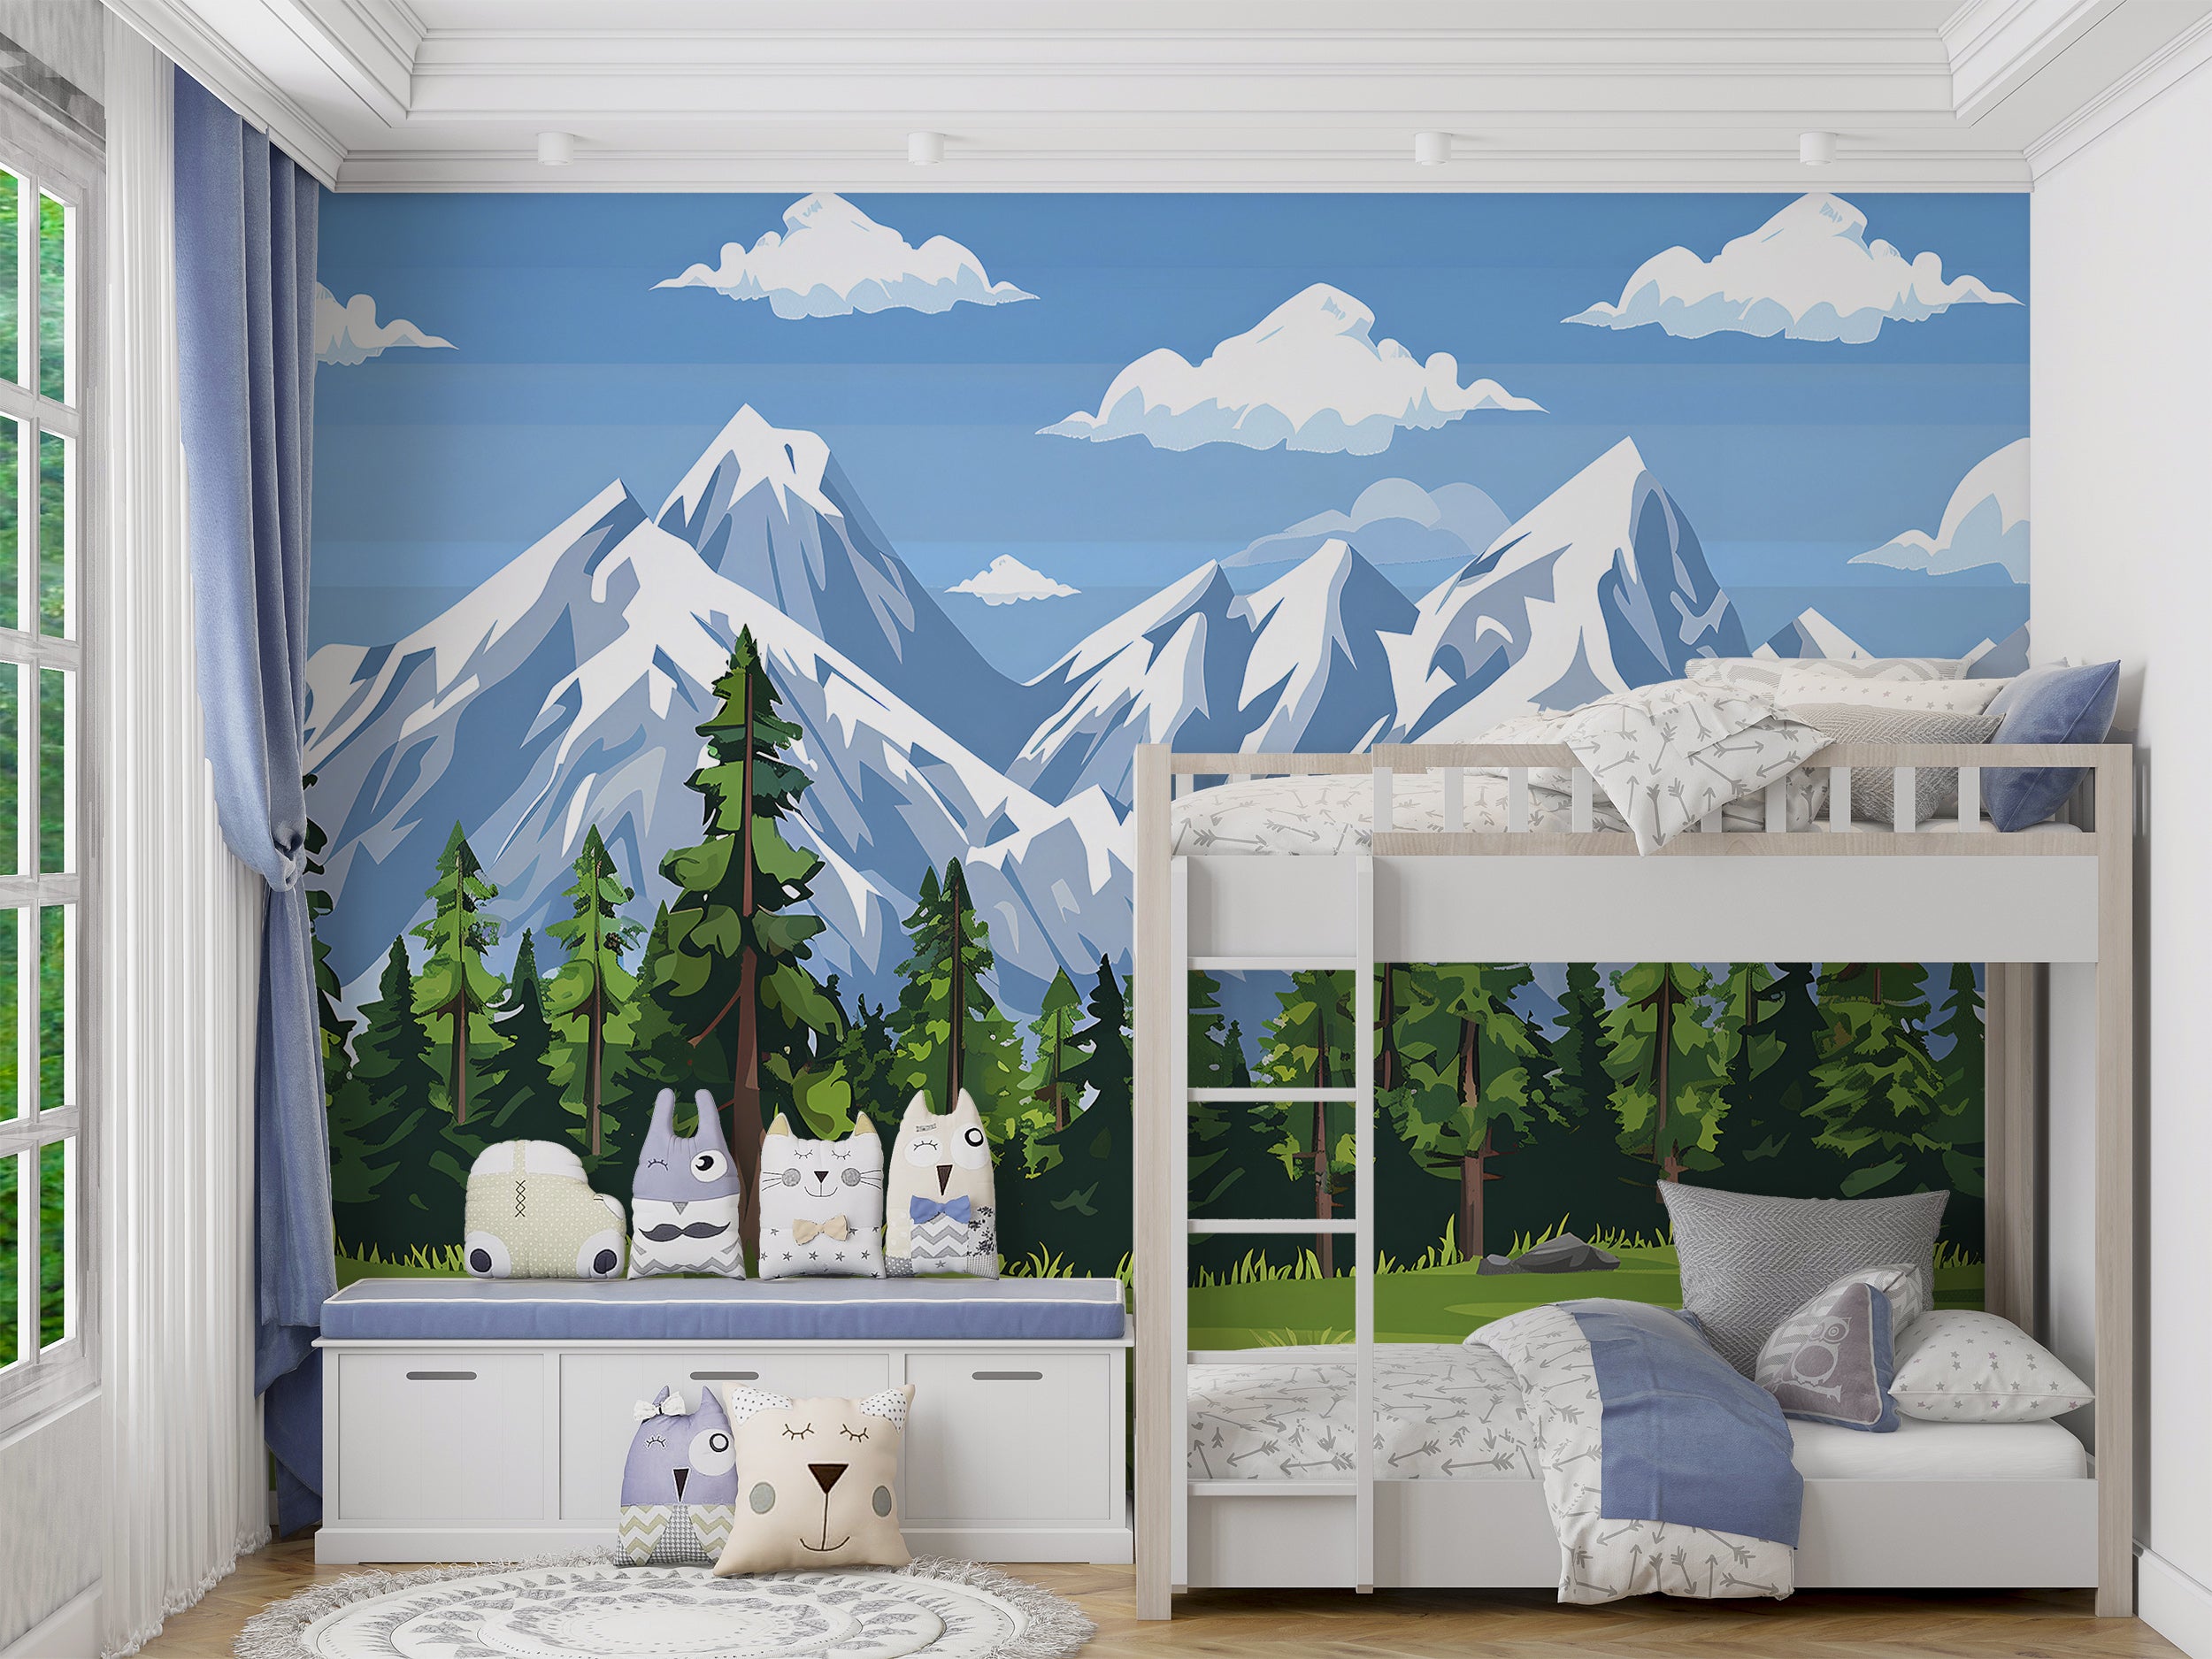 Colorful Nursery Landscape Mural, Kids Room Accent Wall Cartoon Style Nature Mural, Peel and Stick Mountains and Forest Wallpaper